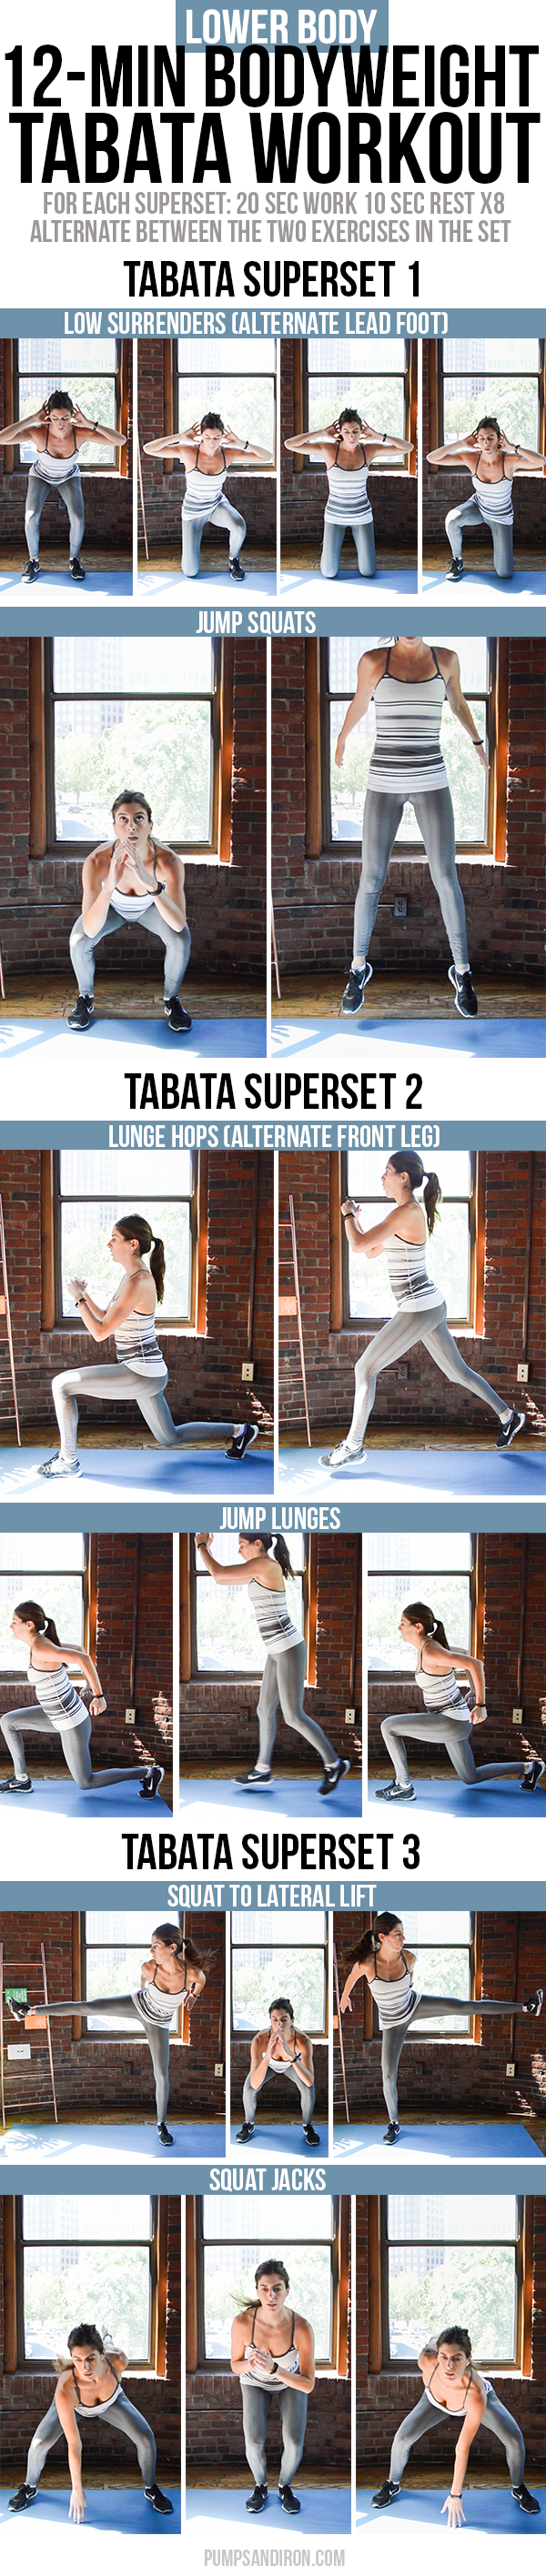 12-Minute Bodyweight Tabata Workout for Legs & Butt -- this workout is broken up into three 4-minute tabata supersets